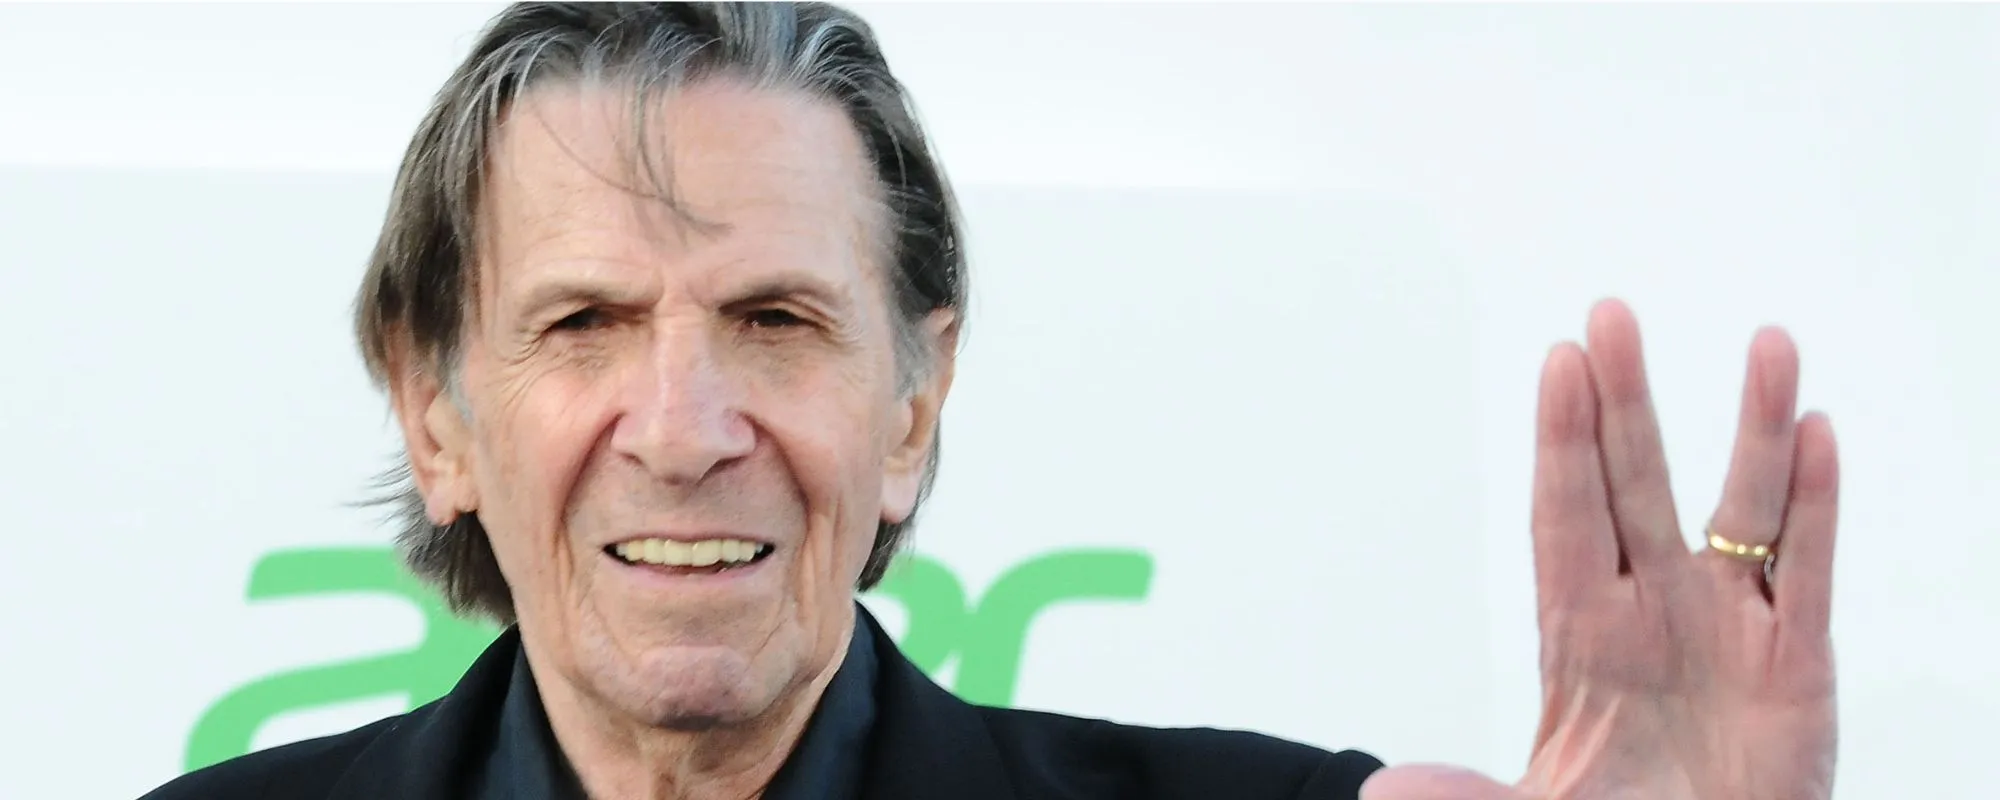 4 Songs You Didn’t Know Leonard Nimoy Wrote Within His Short Musical Career